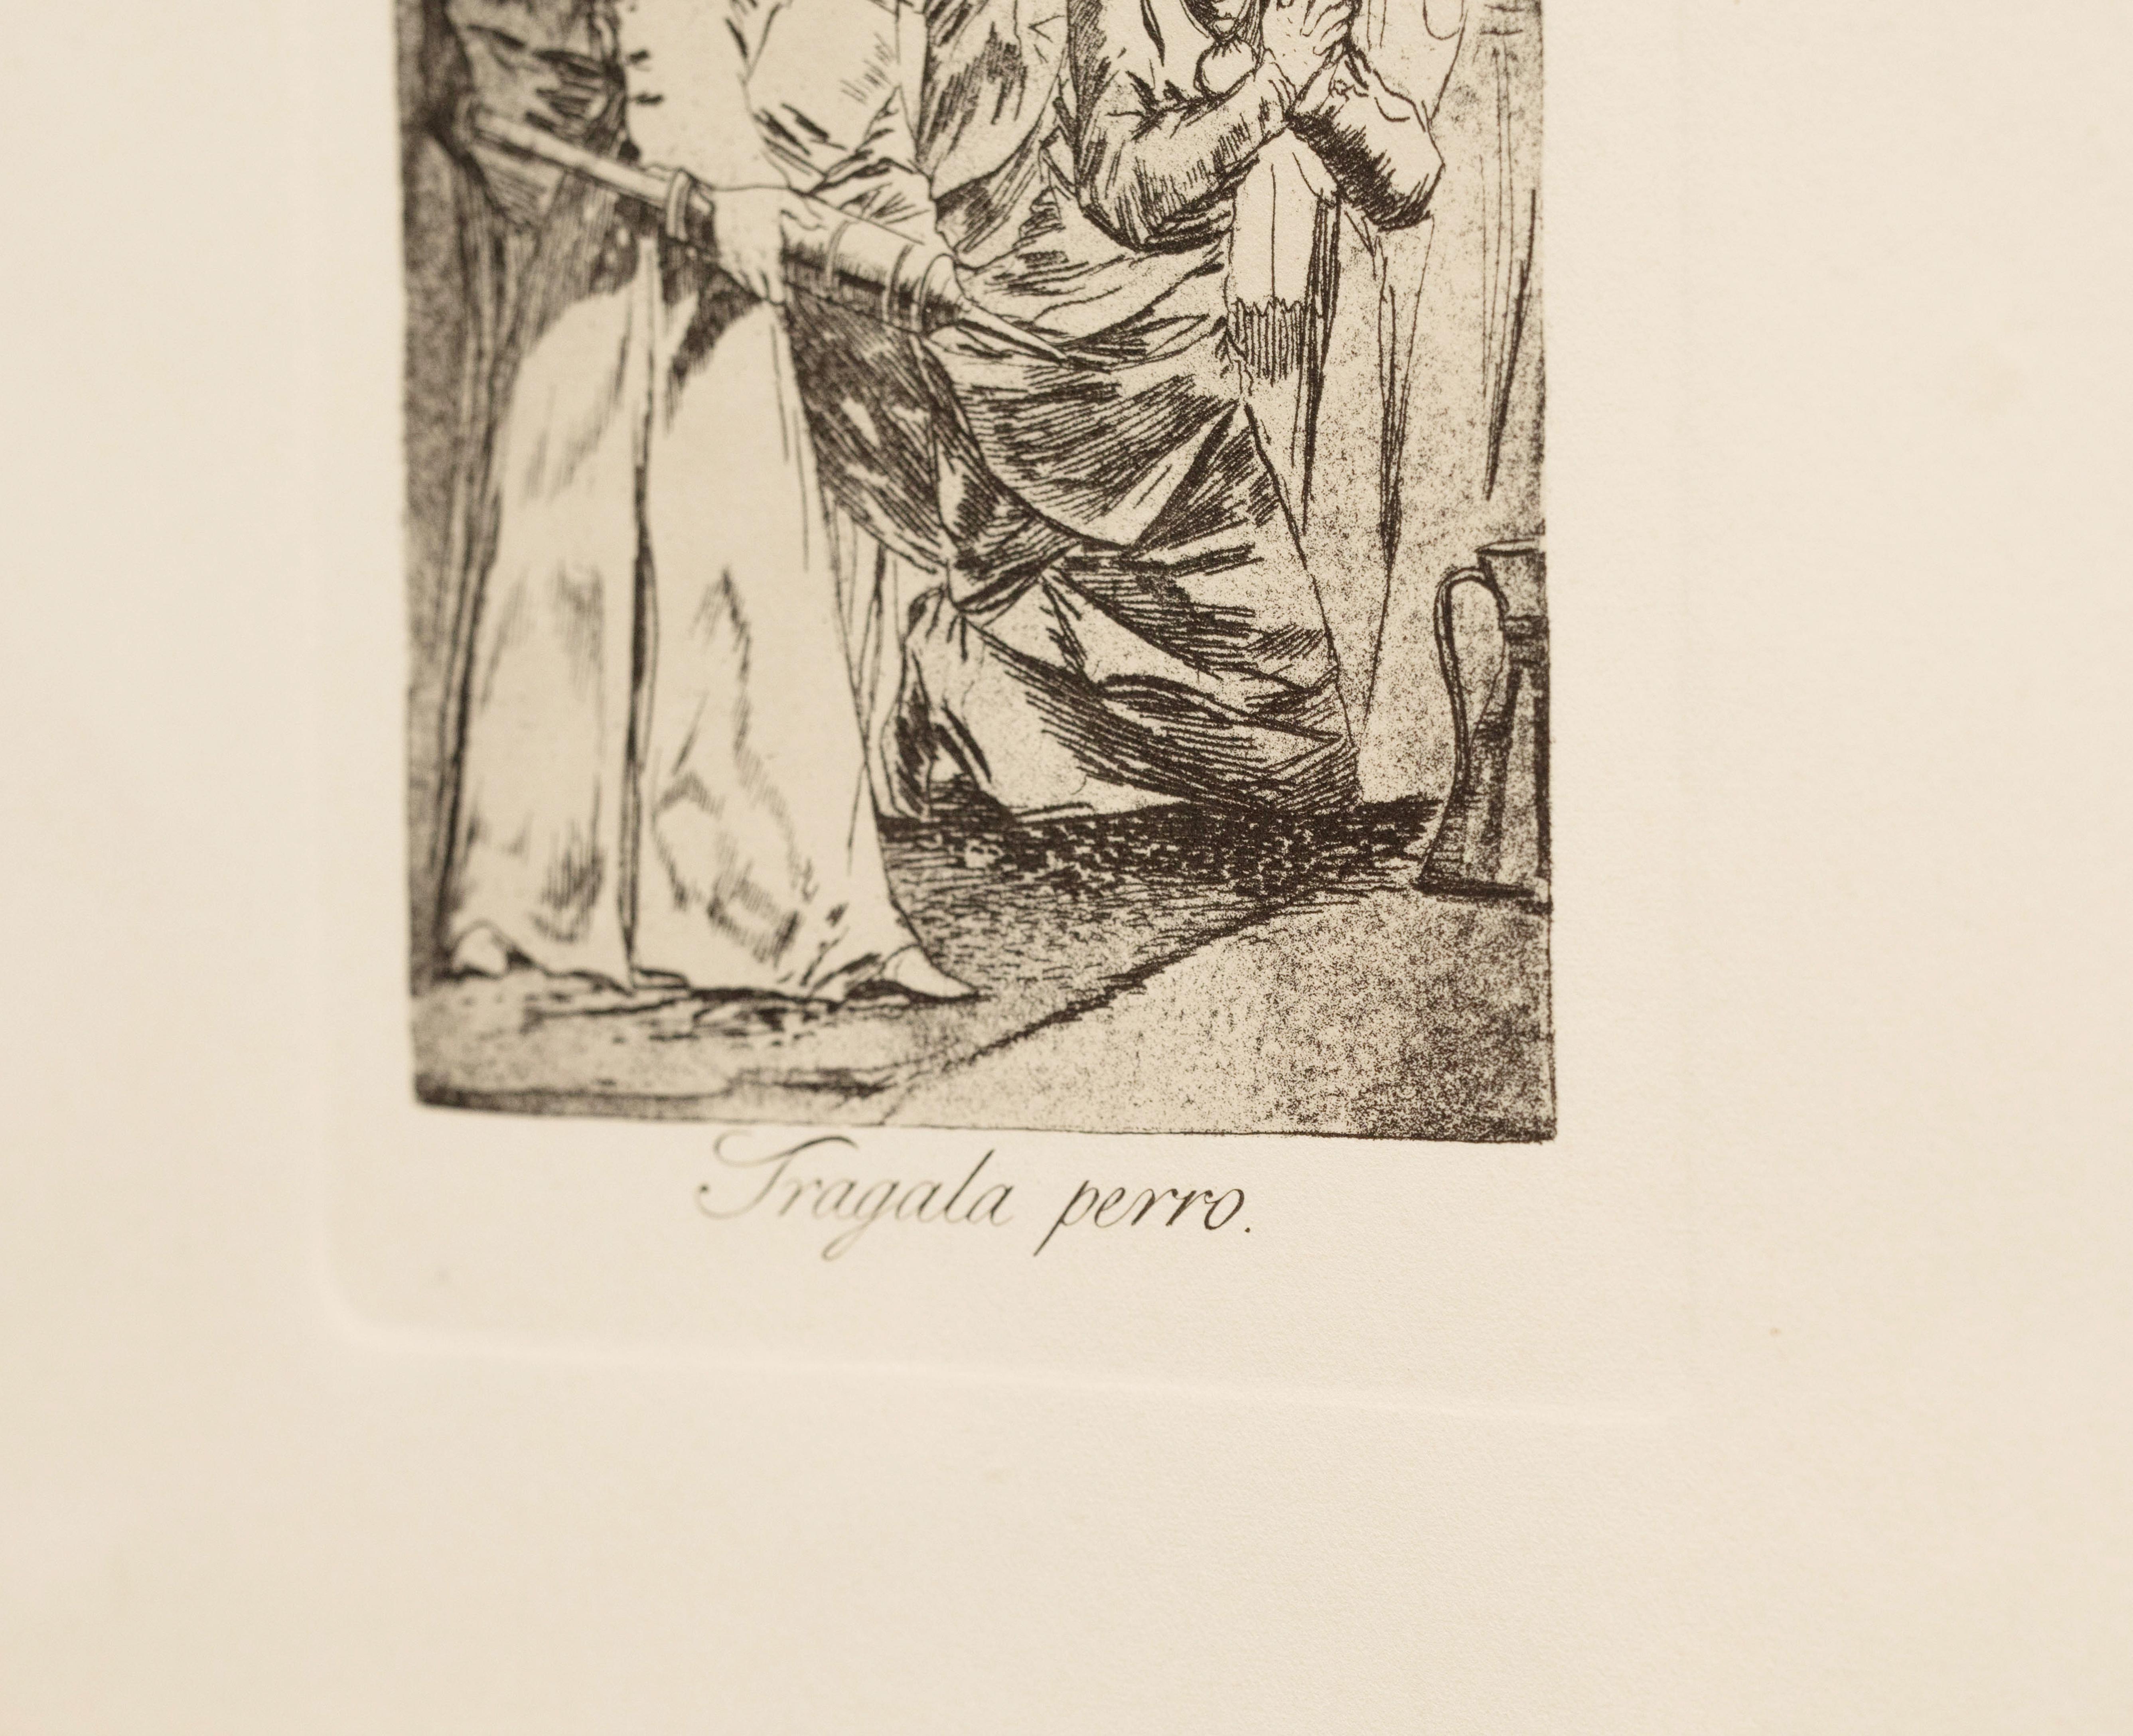 Glass Goya's Etching Tragala Perro 1797-1799 for Prado Museum in Madrid For Sale